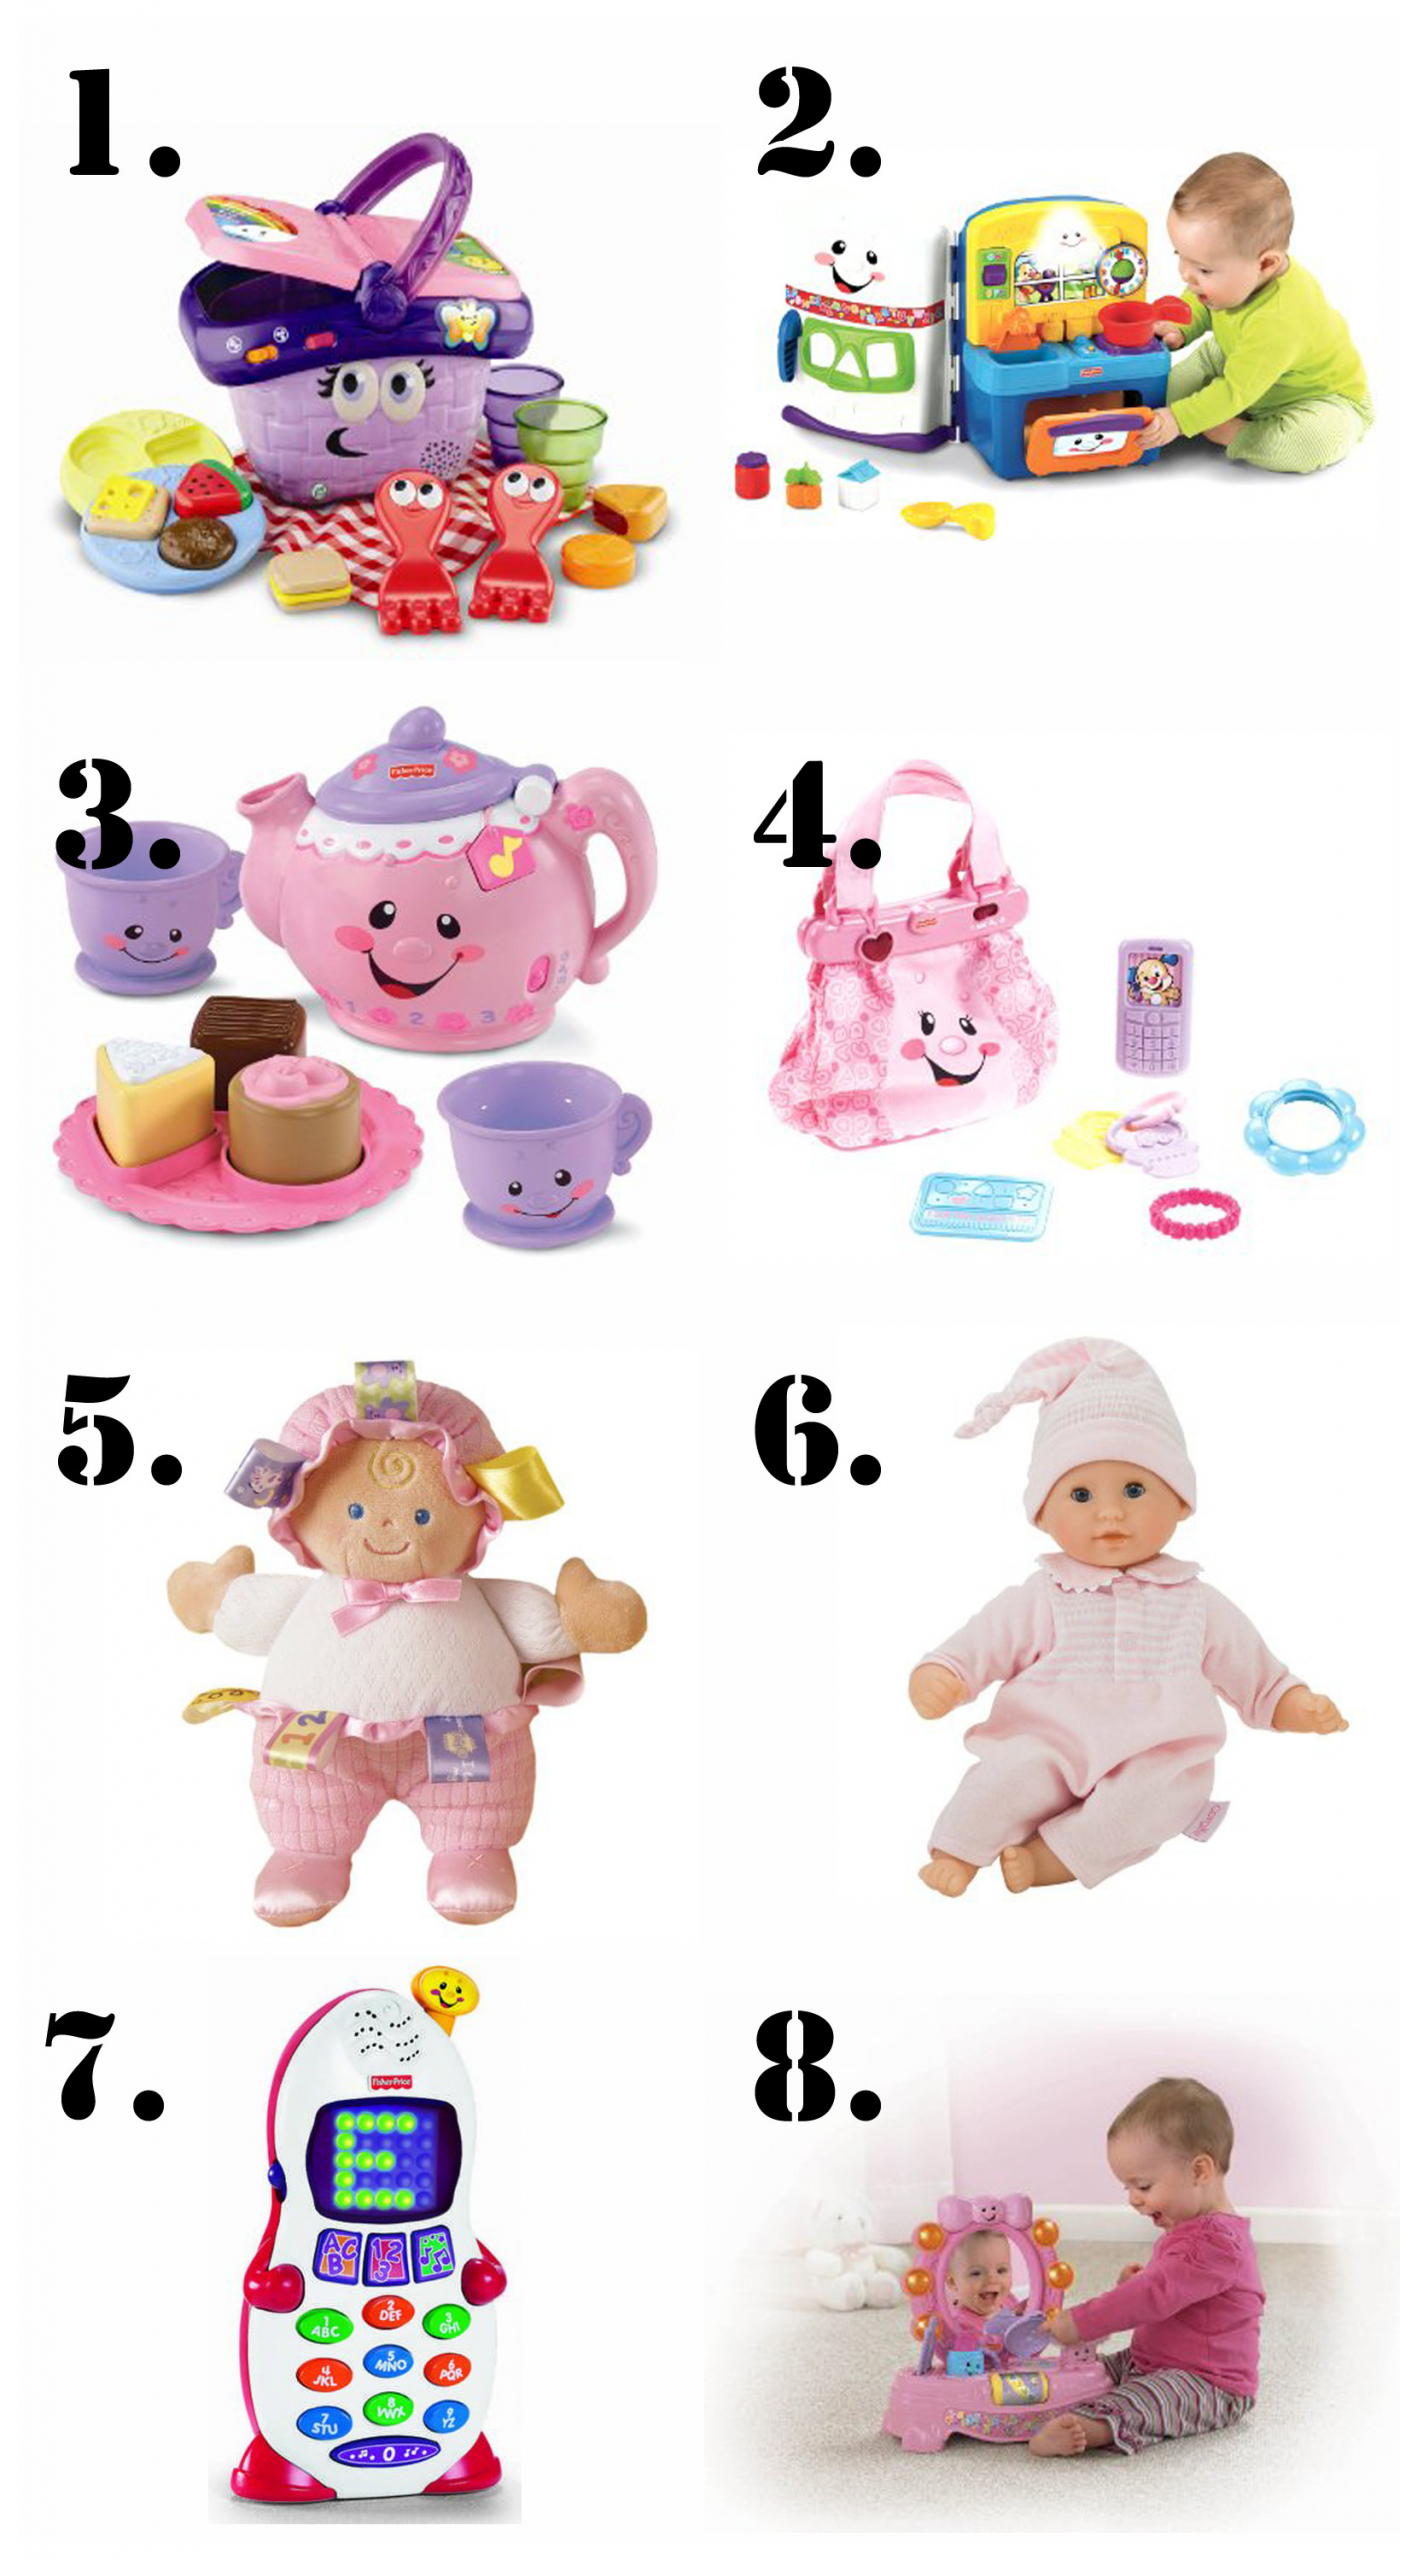 1St Birthday Gift Ideas For Daughter
 best birthday presents for a 1 year old